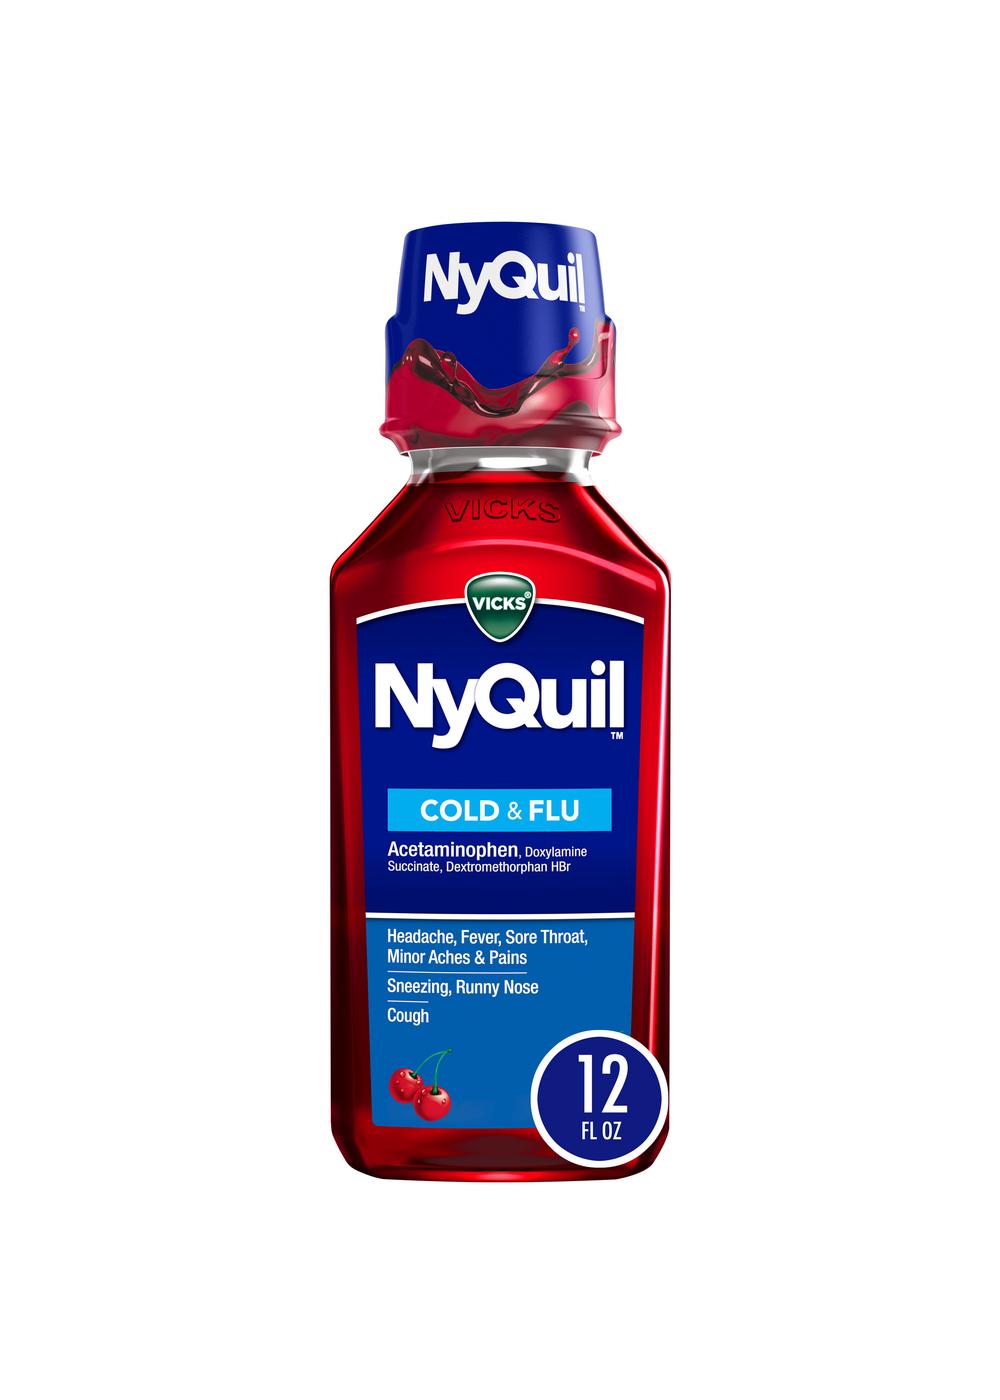 Vicks NyQuil Cold & Flu Relief Liquid - Cherry; image 1 of 9